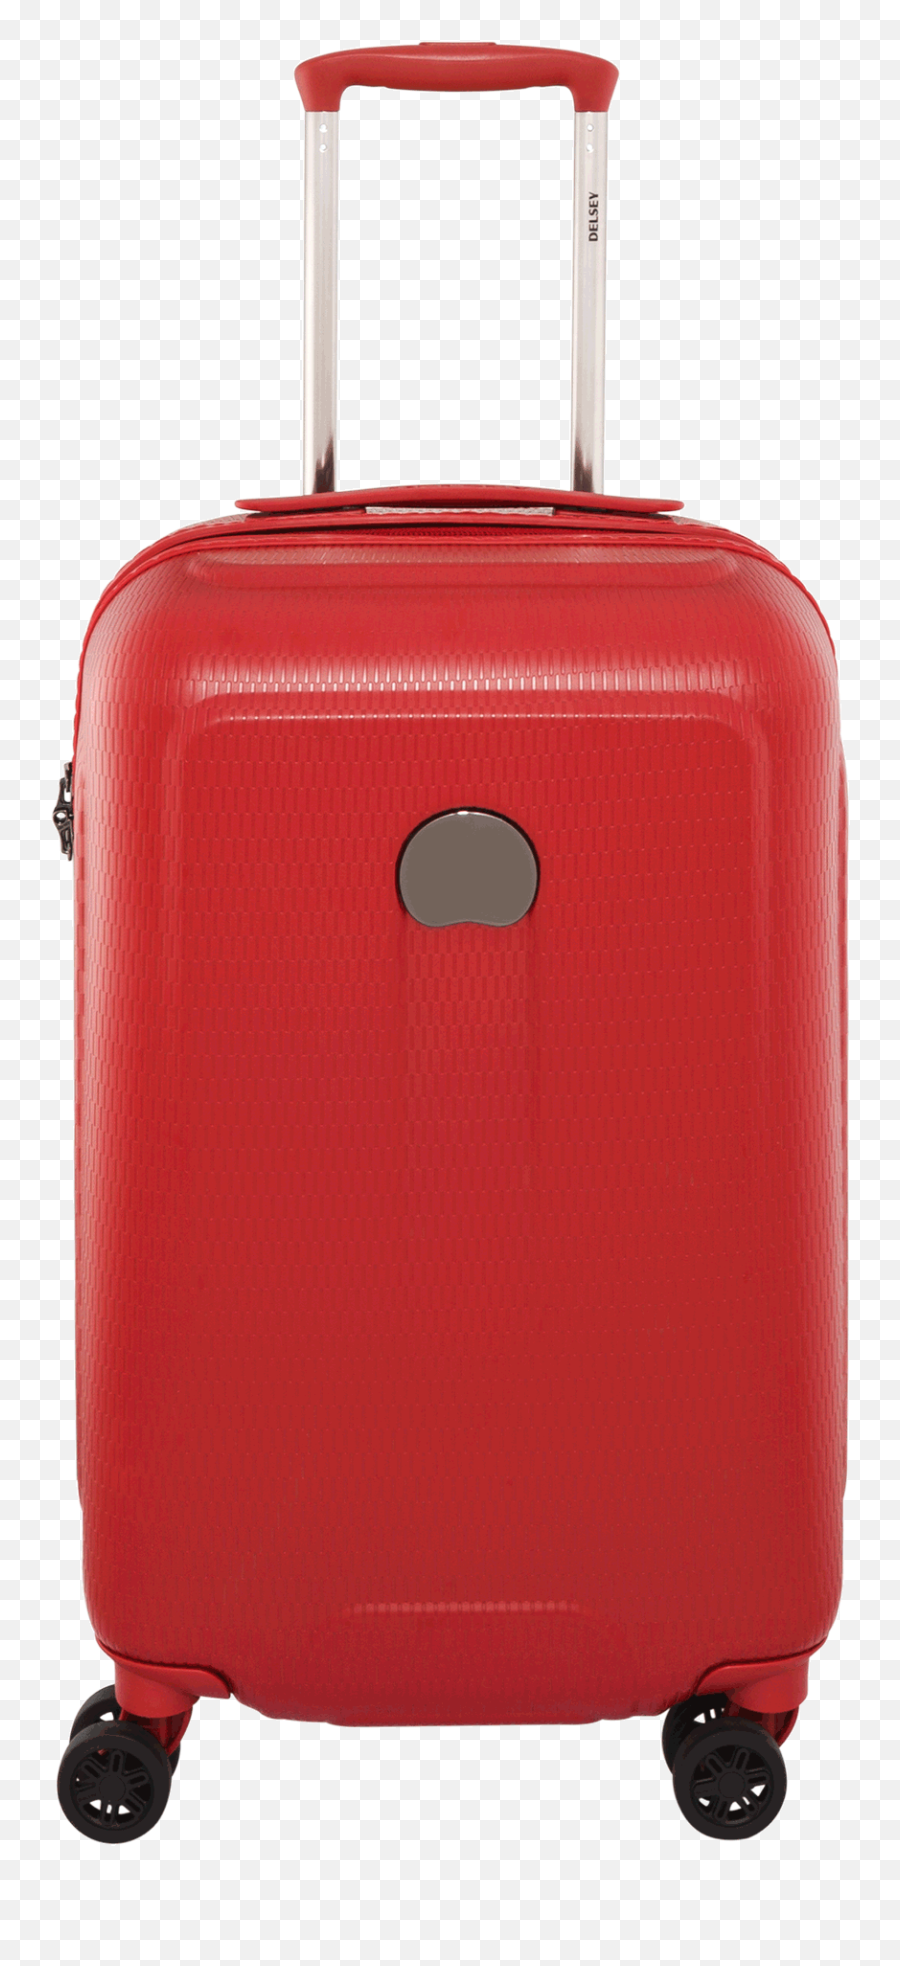 Pink Luggage Png Image For Free Download - Transparent Background Luggage Png,Luggage Png